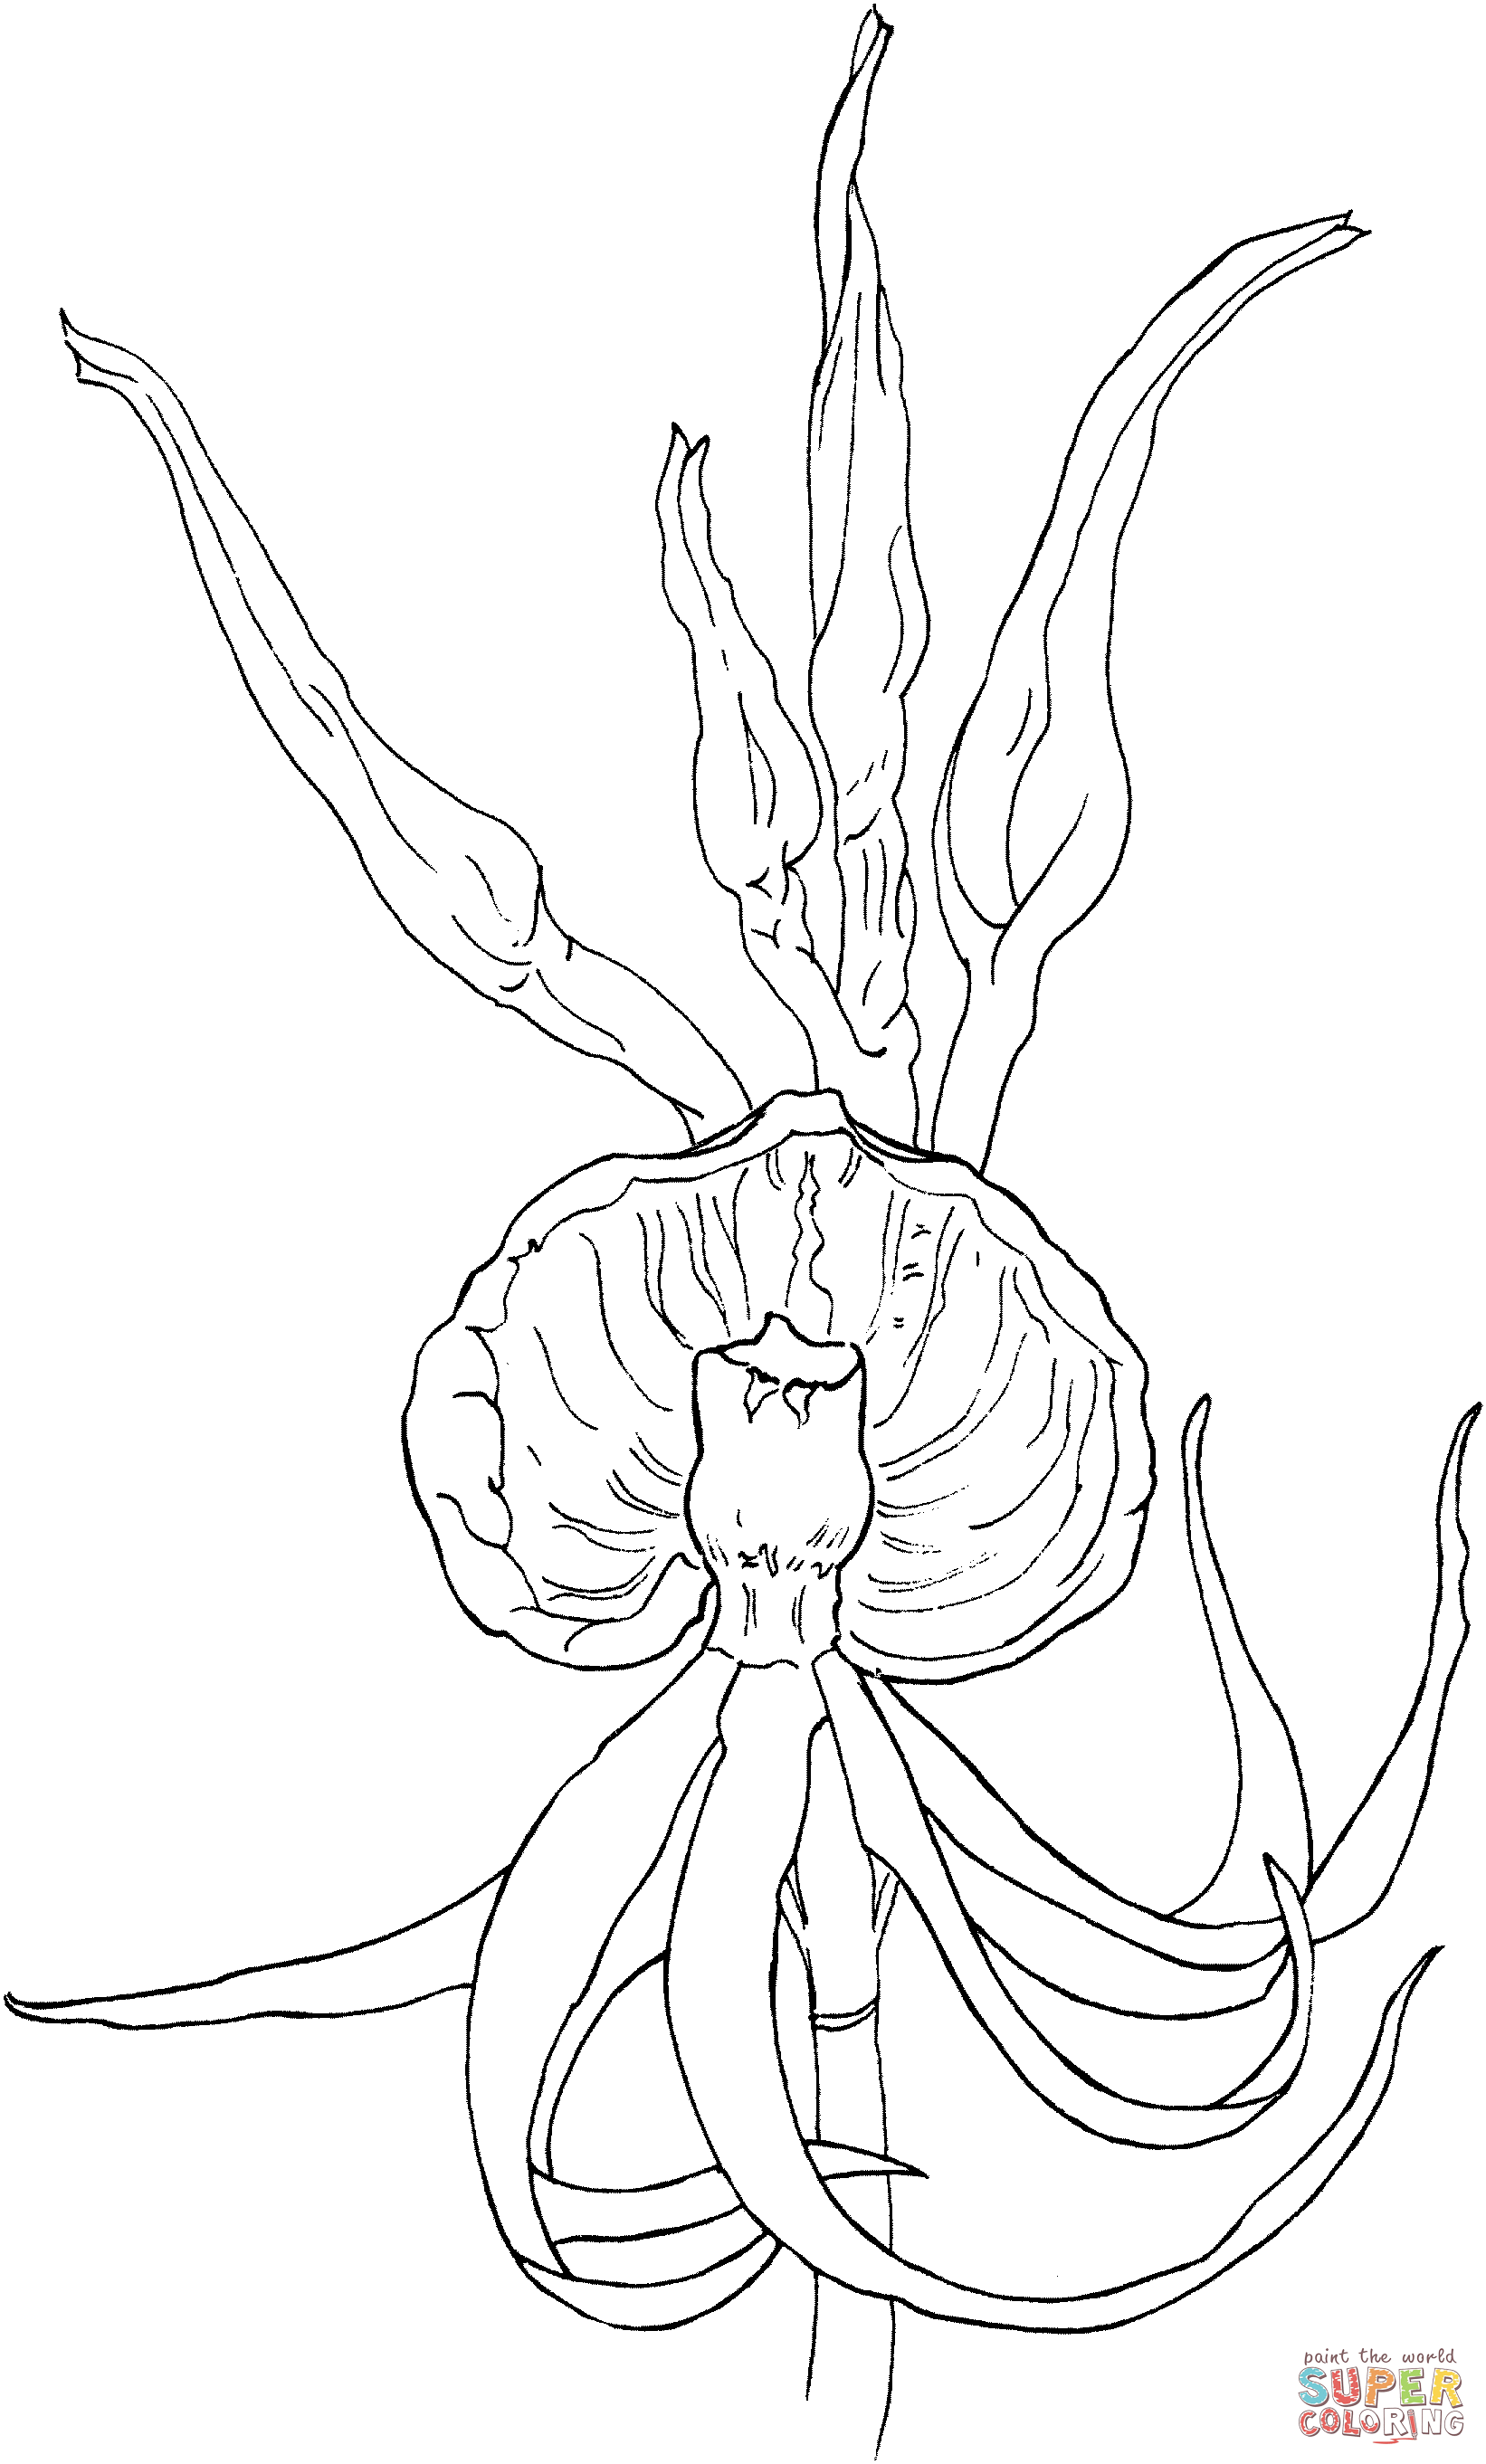 Clam Shell Orchid or Epidendrum Cochleatum Coloring Page